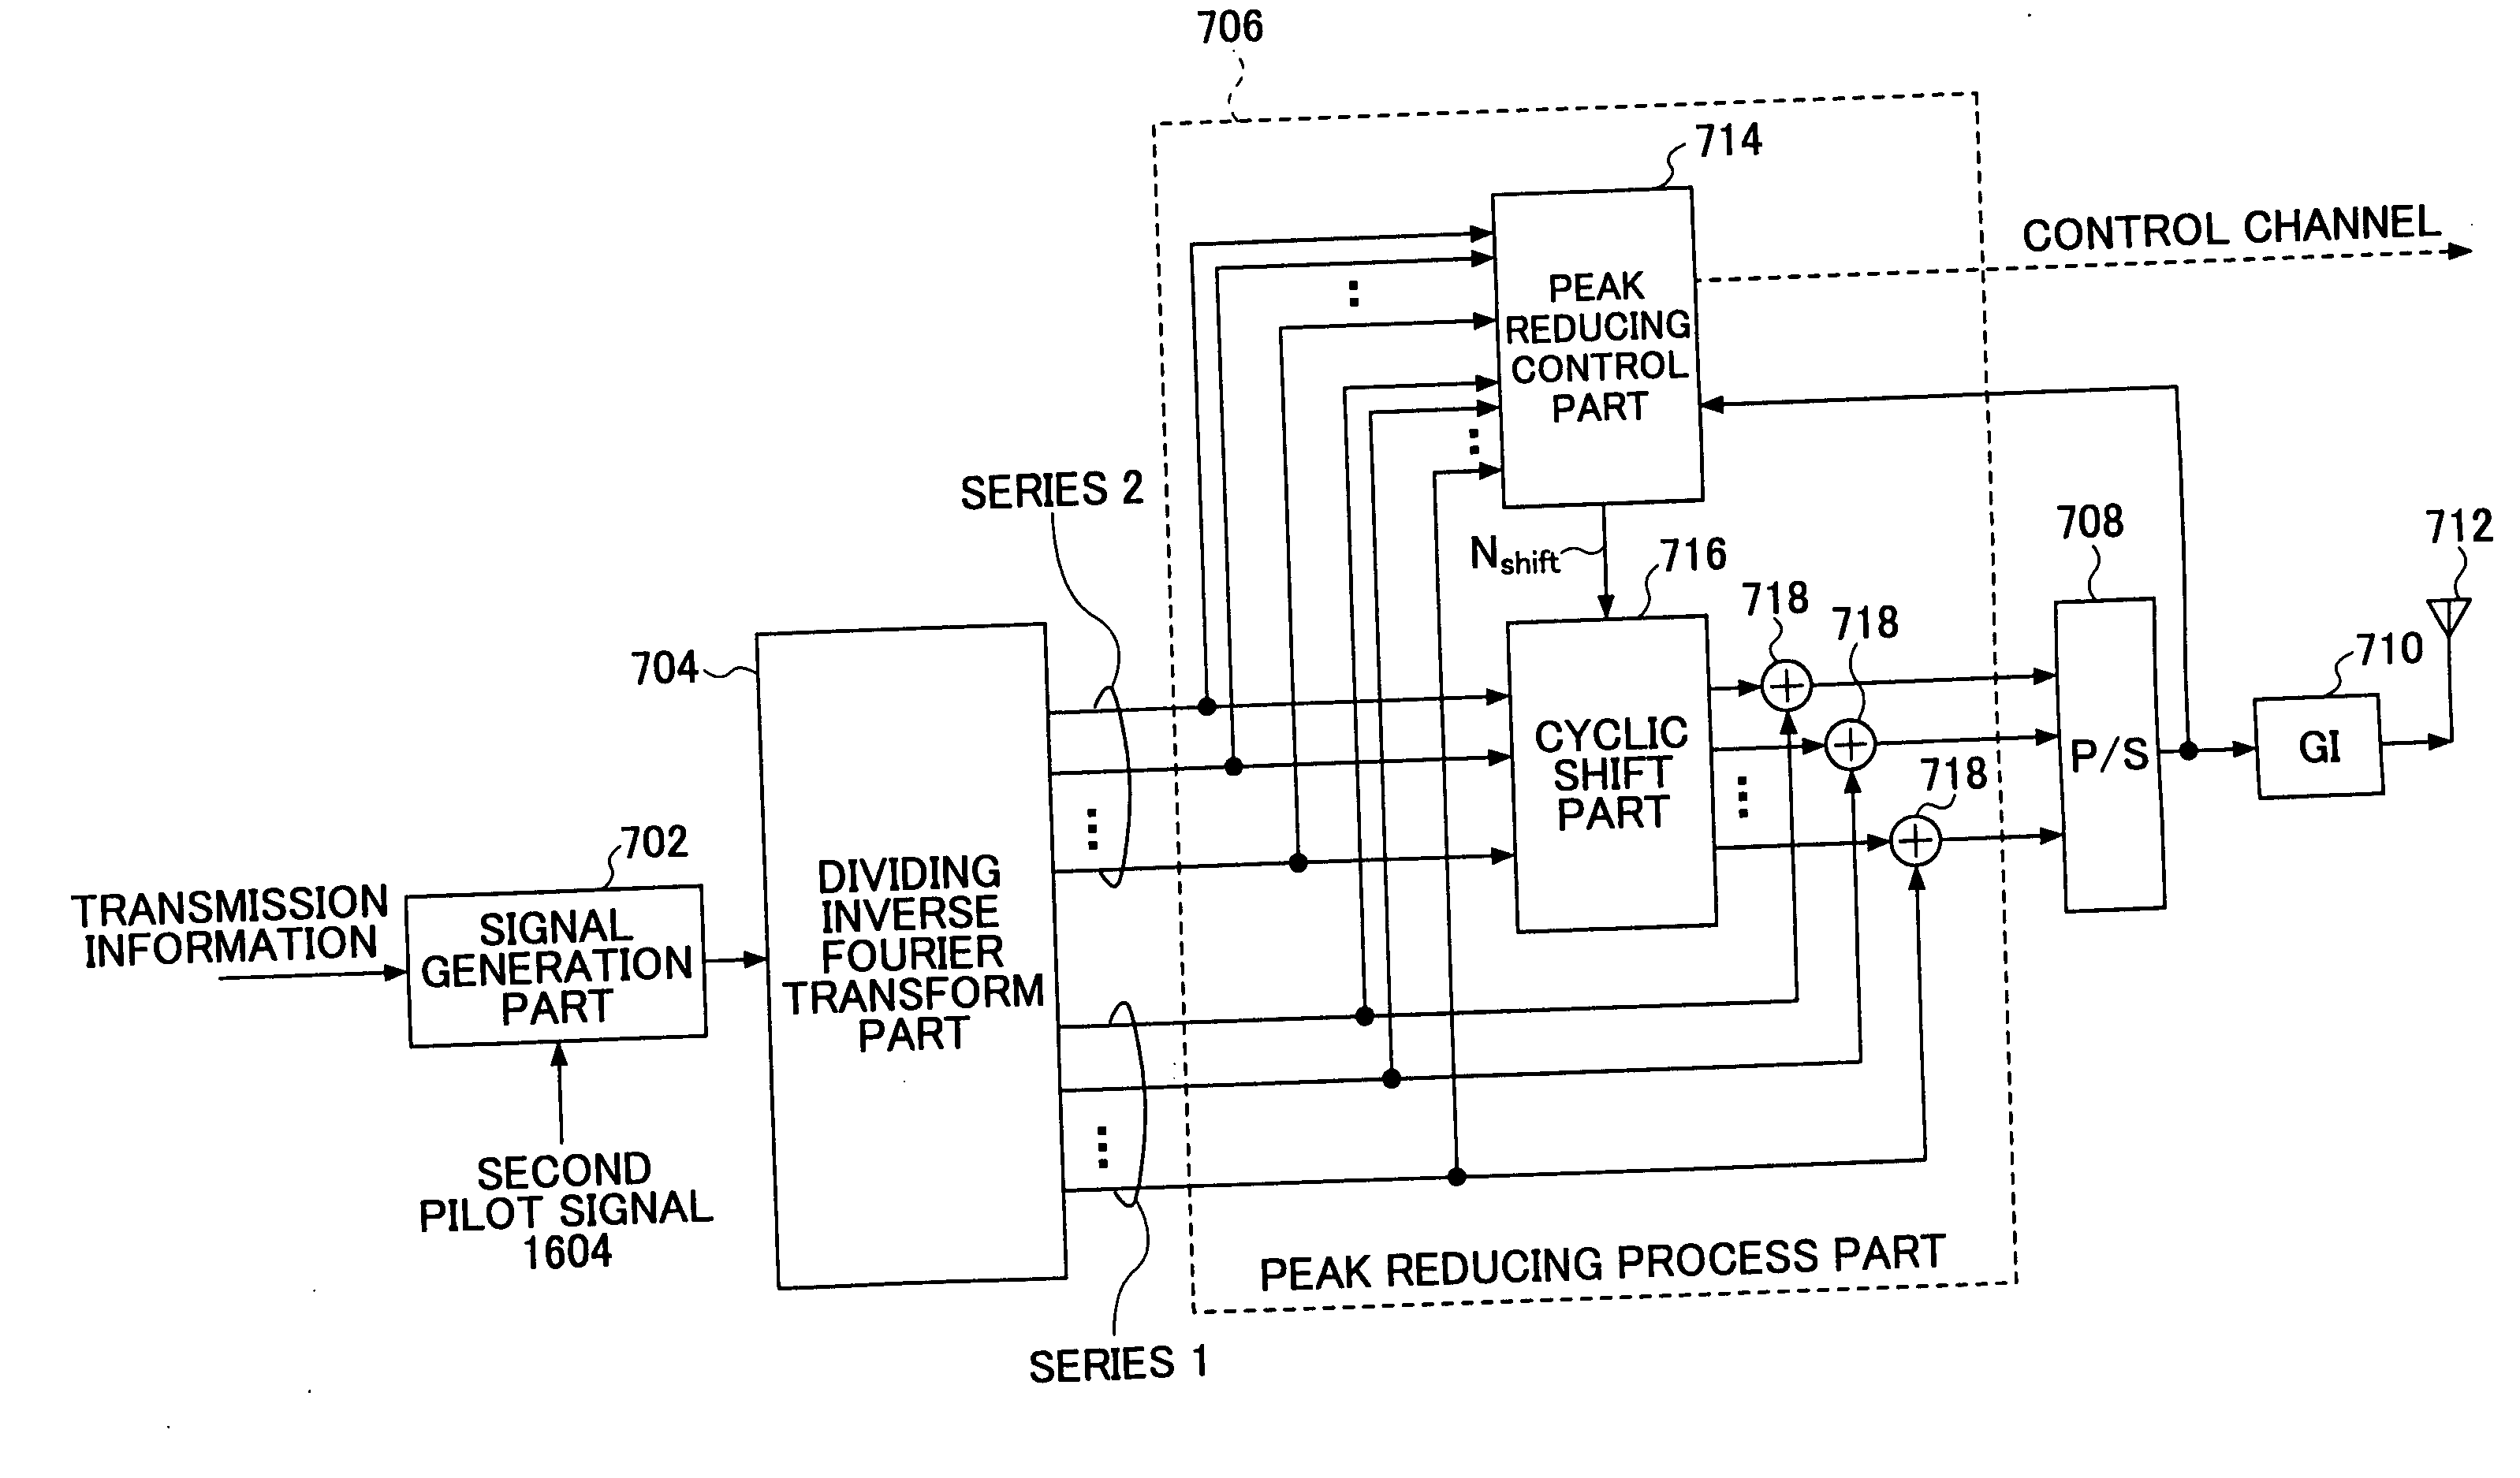 Transmission apparatus and receiving apparatus